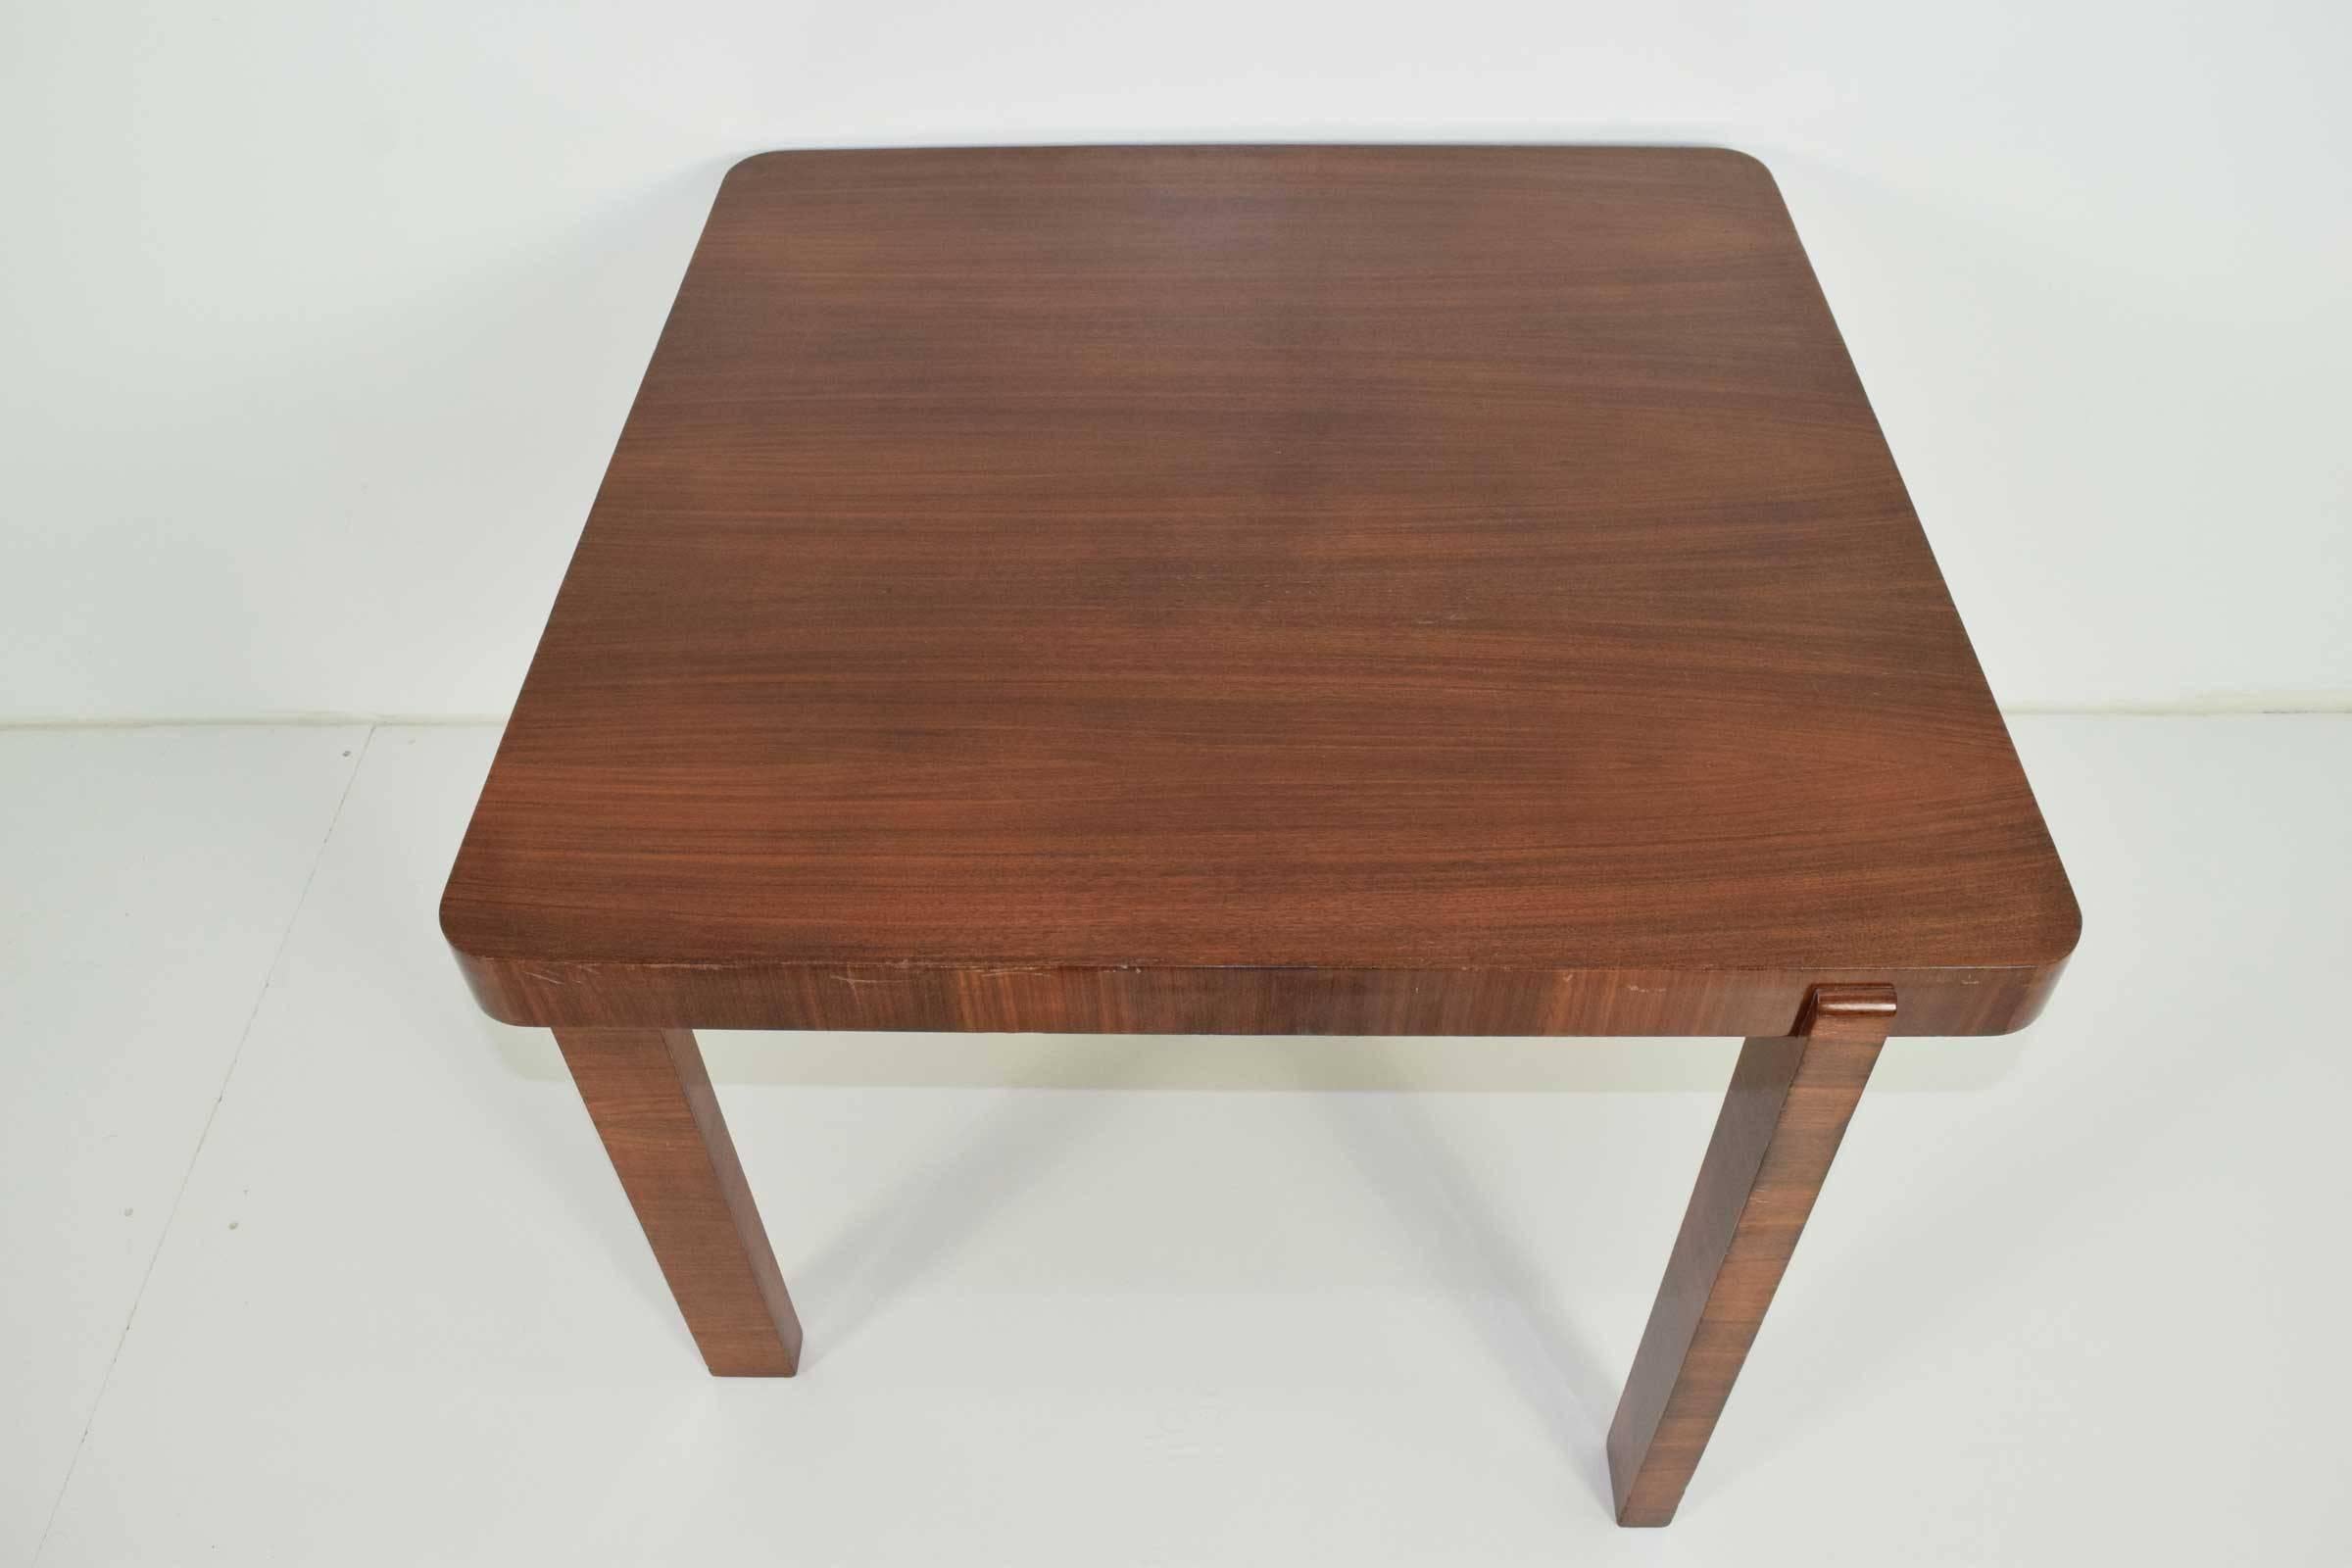 Unique style card table in a mahogany finish.